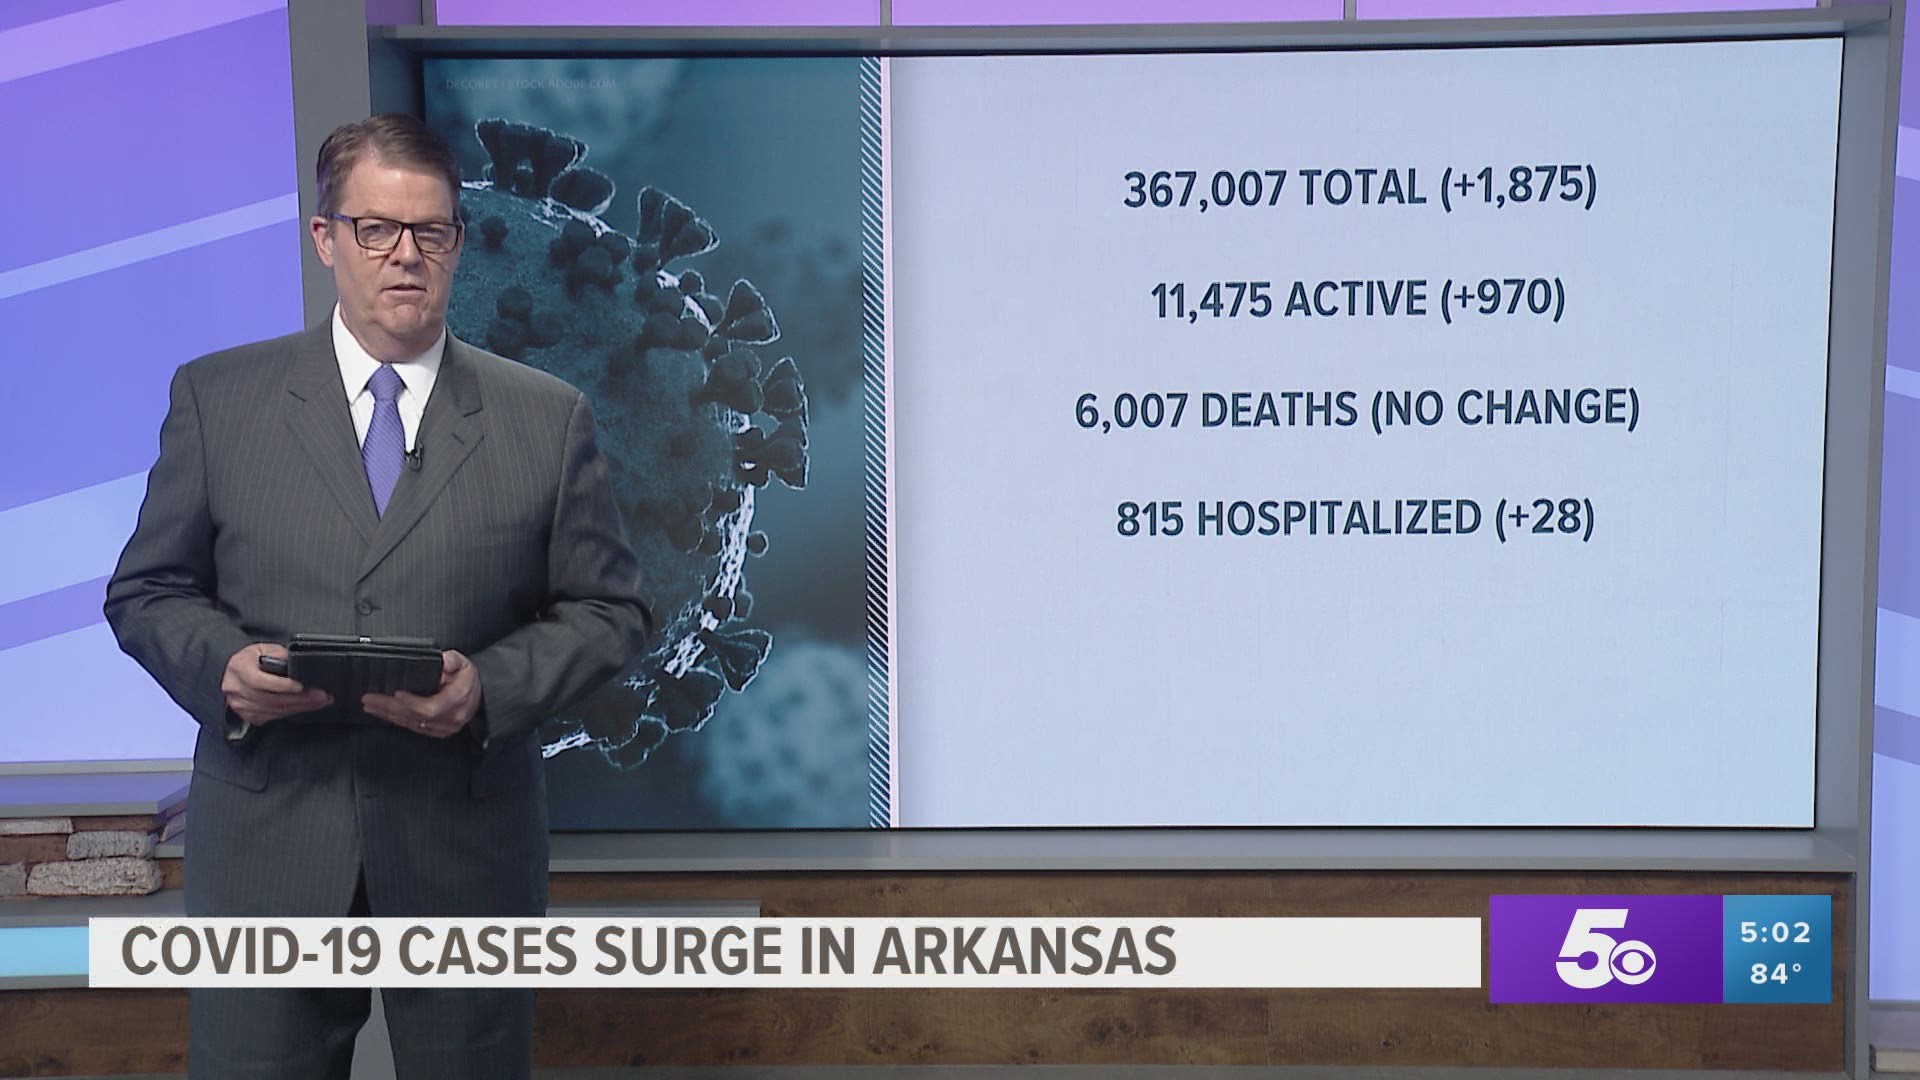 Arkansas COVID-19 case rose by nearly 2,000 on Tuesday (July 20), according to data published by the Arkansas Department of Health (ADH).